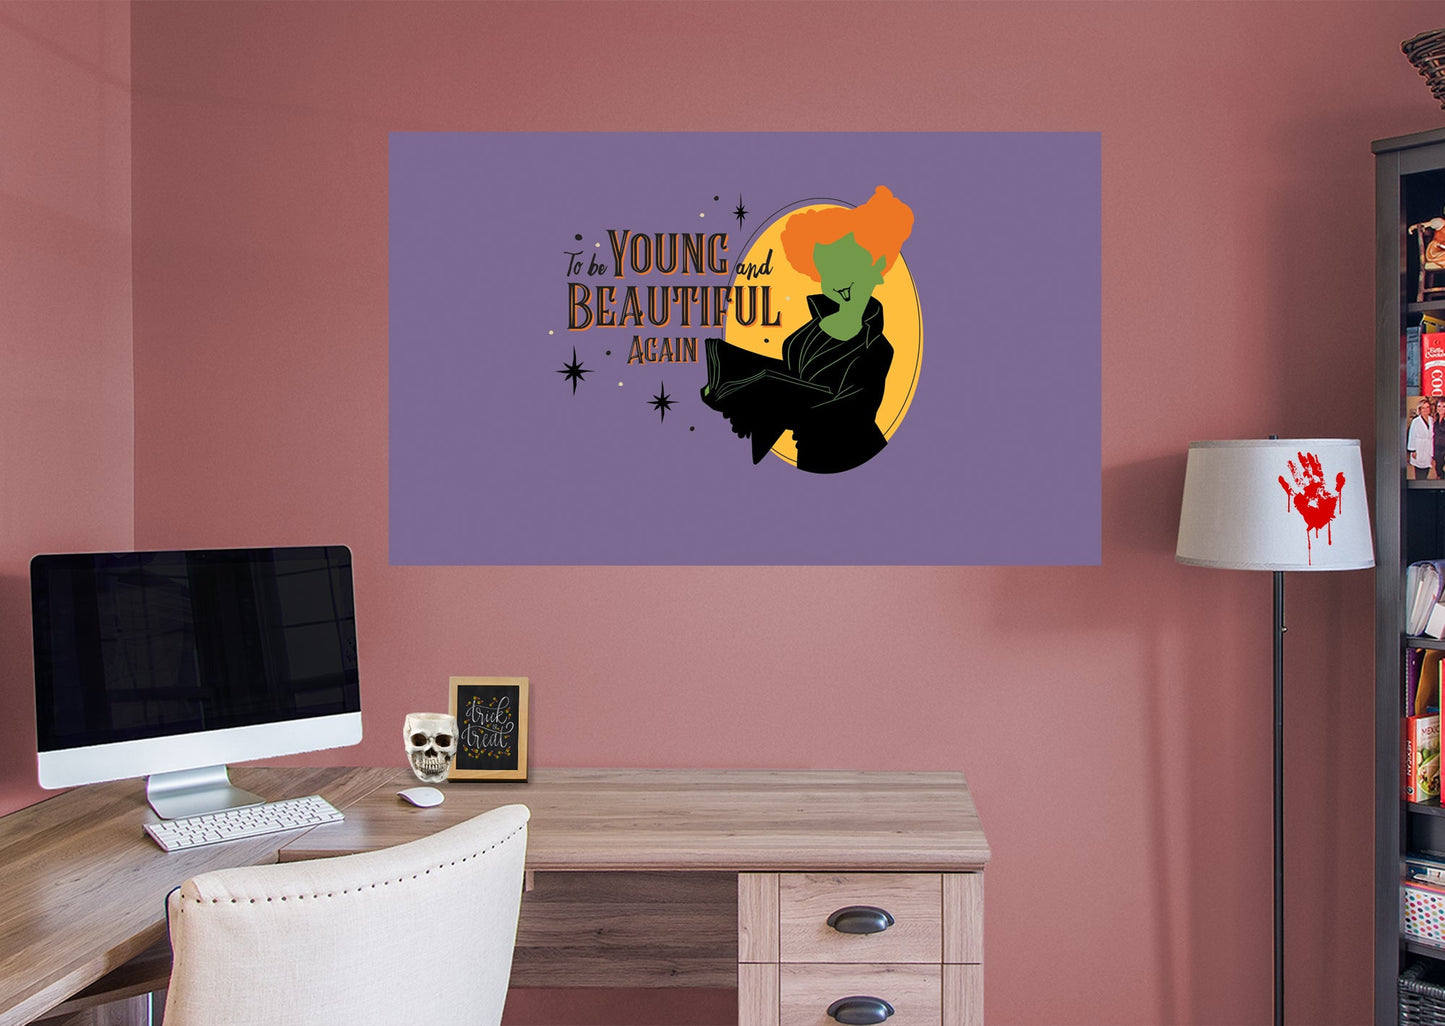 Hocus Pocus:  To be Young and Beuatiful Again Mural        - Officially Licensed Disney Removable Wall   Adhesive Decal